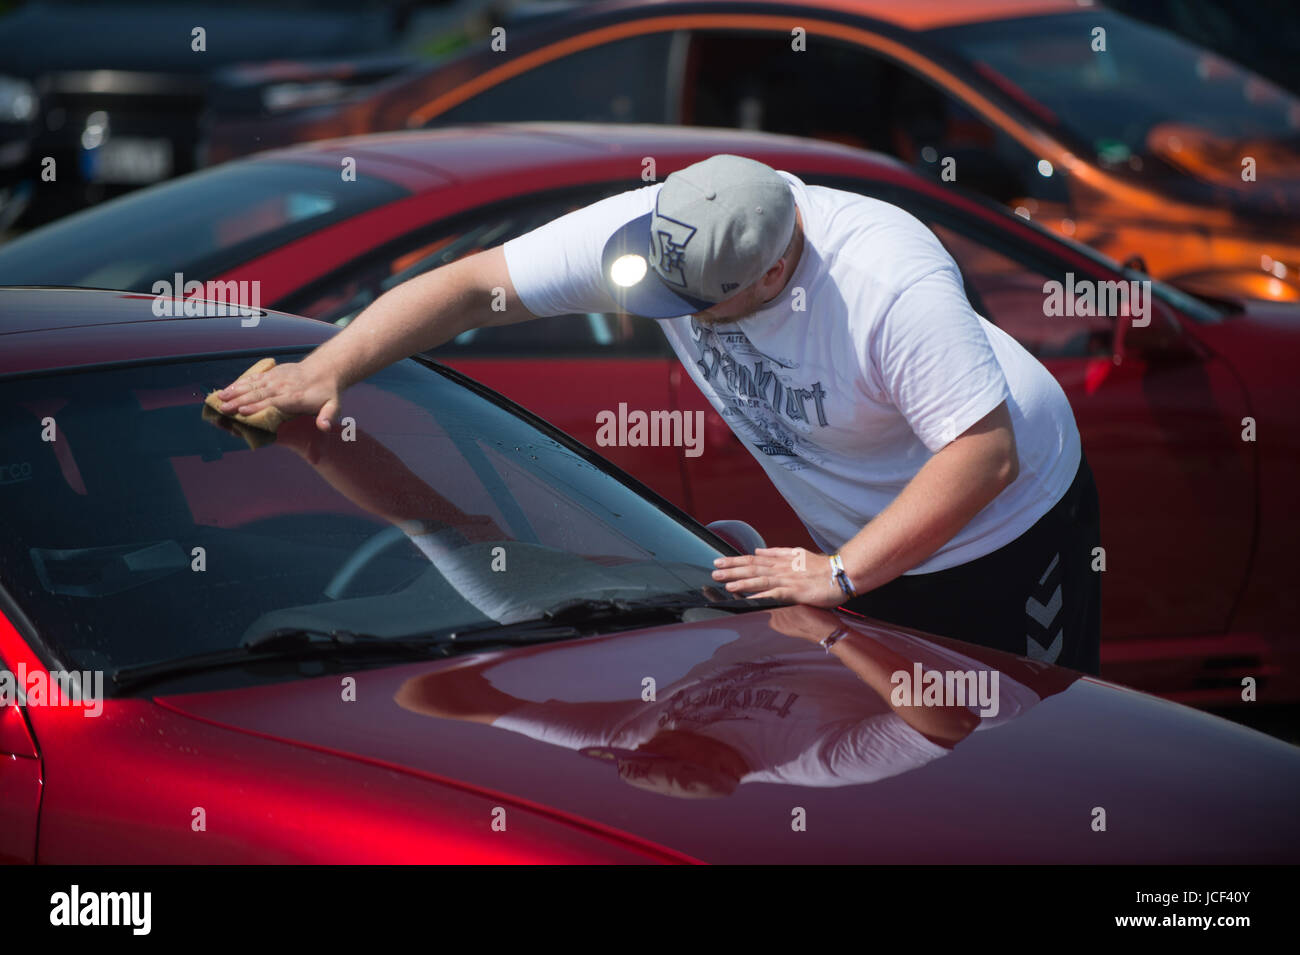 Daniel Heine from Frankfurt polishes his Opel Calibra from the year 1994 during the Opel Meeting in Oschersleben, Germany, 15 June 2017. The varnish of the car is a candy gloss called 'Apple Red'. The Opel Meeting is taking place for the 22nd time and will last until the 18th of June 2017. Photo: Klaus-Dietmar Gabbert/dpa-Zentralbild/ZB Stock Photo